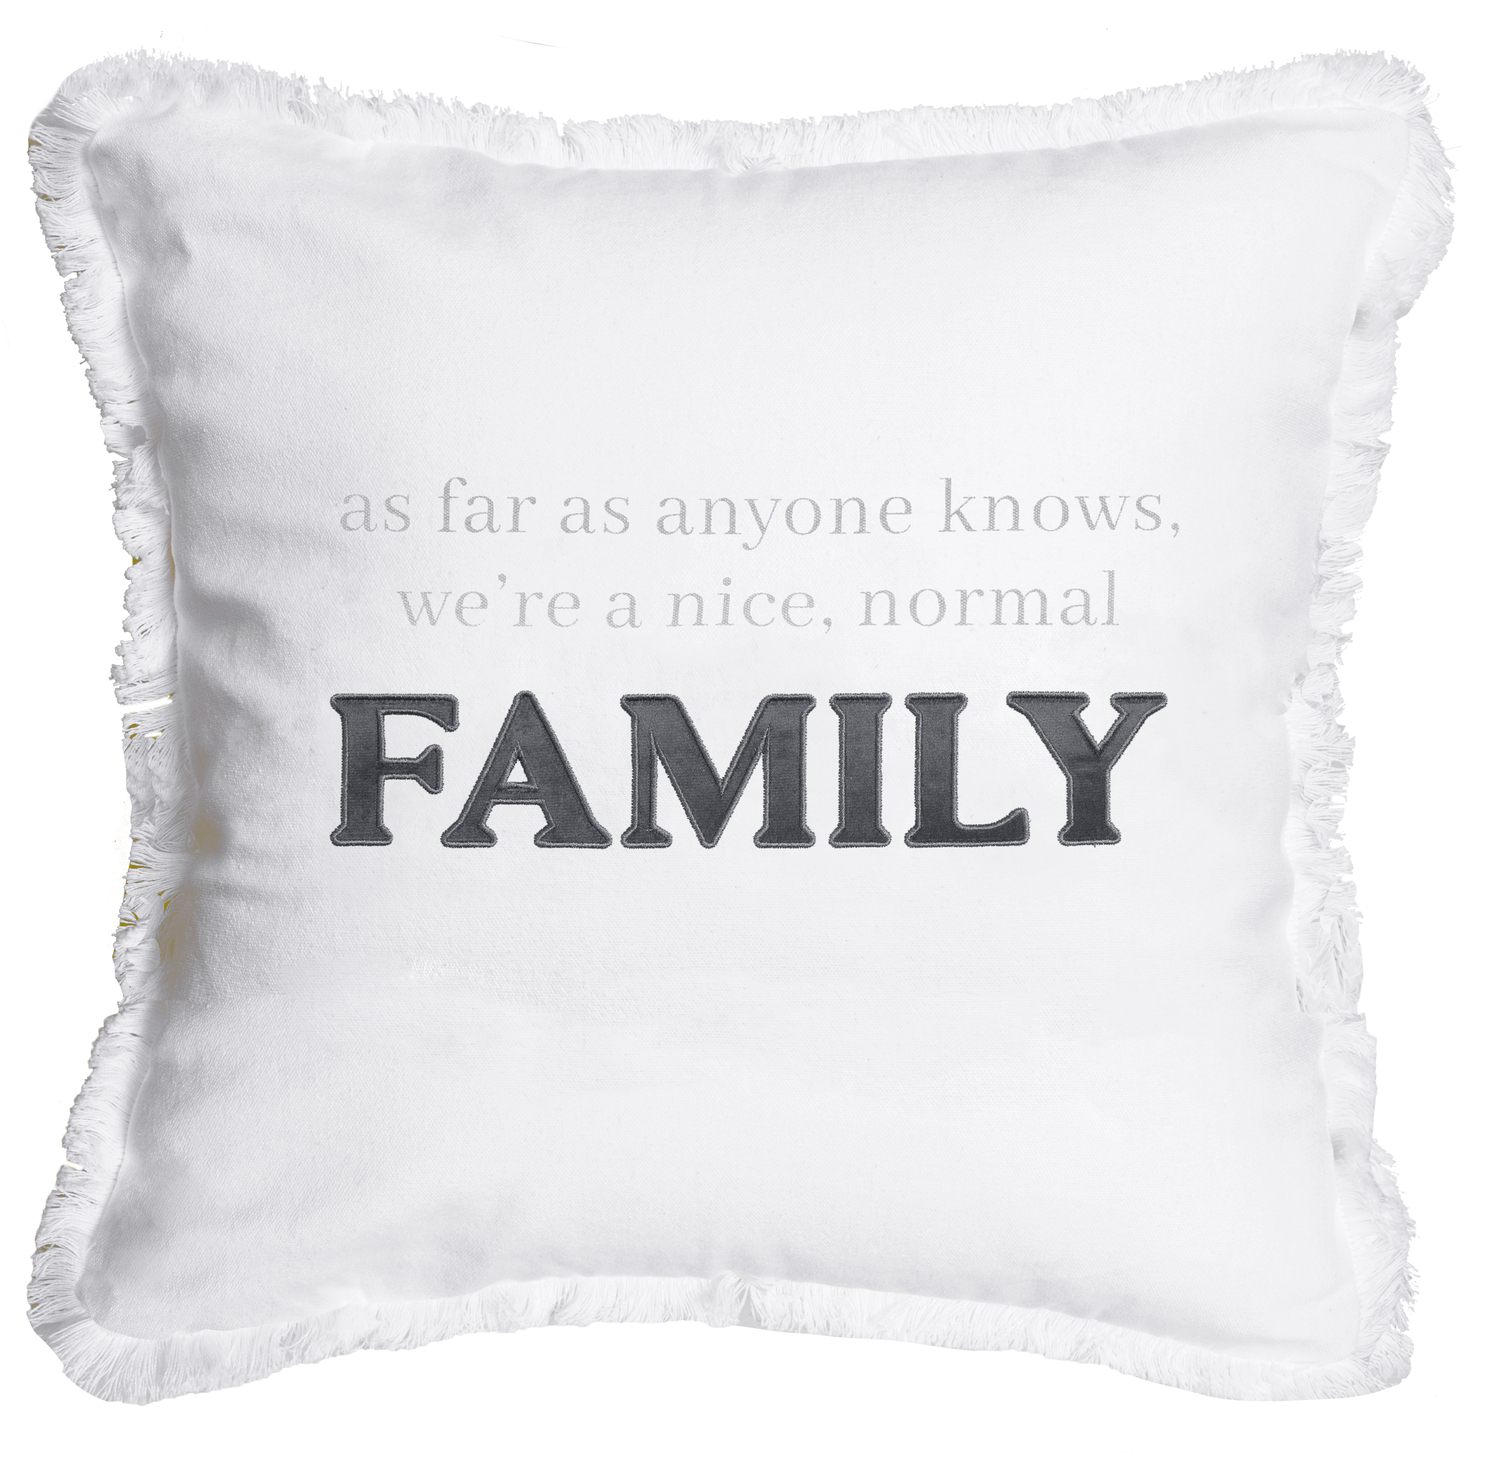 Normal Family by Tossing Words Around - Normal Family - 18" Throw Pillow Cover